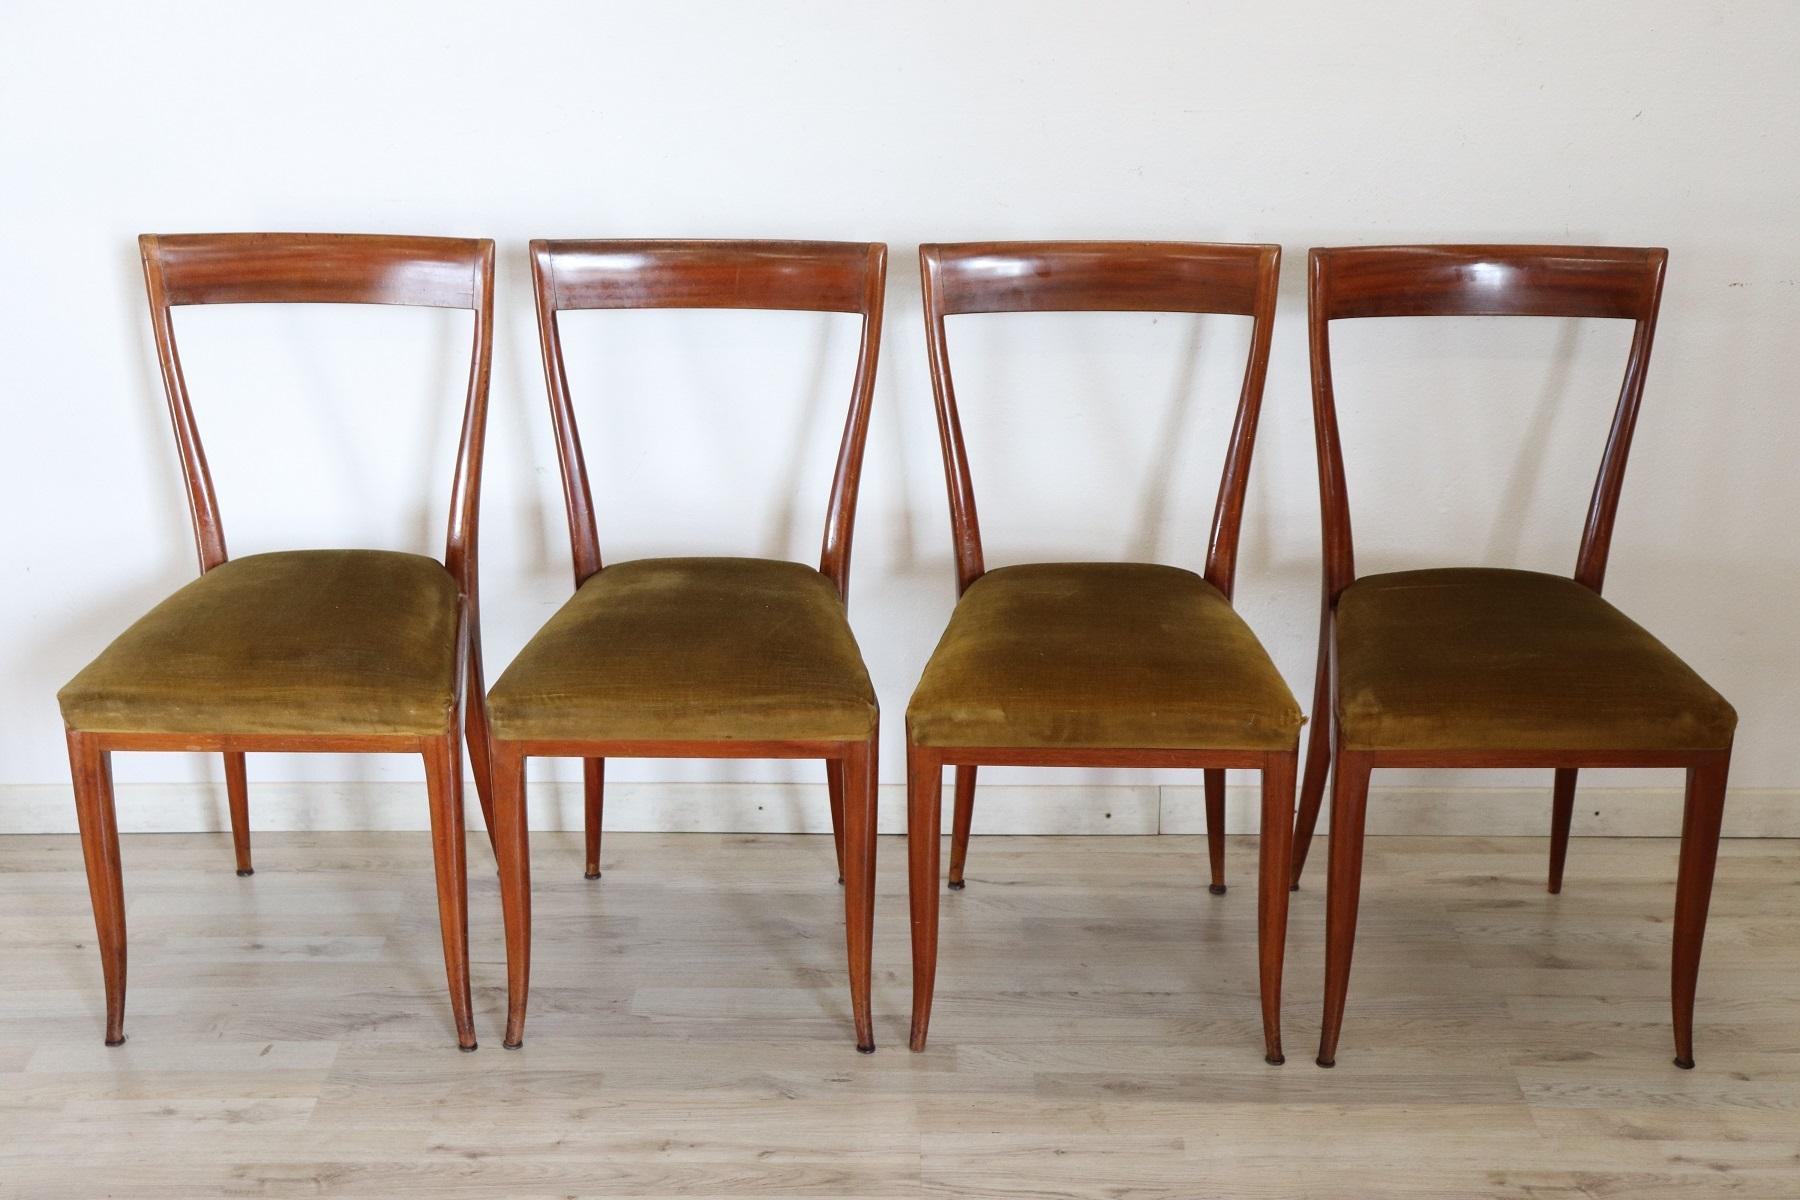 20th Century Italian Design Inlaid Mahogany Dining Table with Four Chairs 5